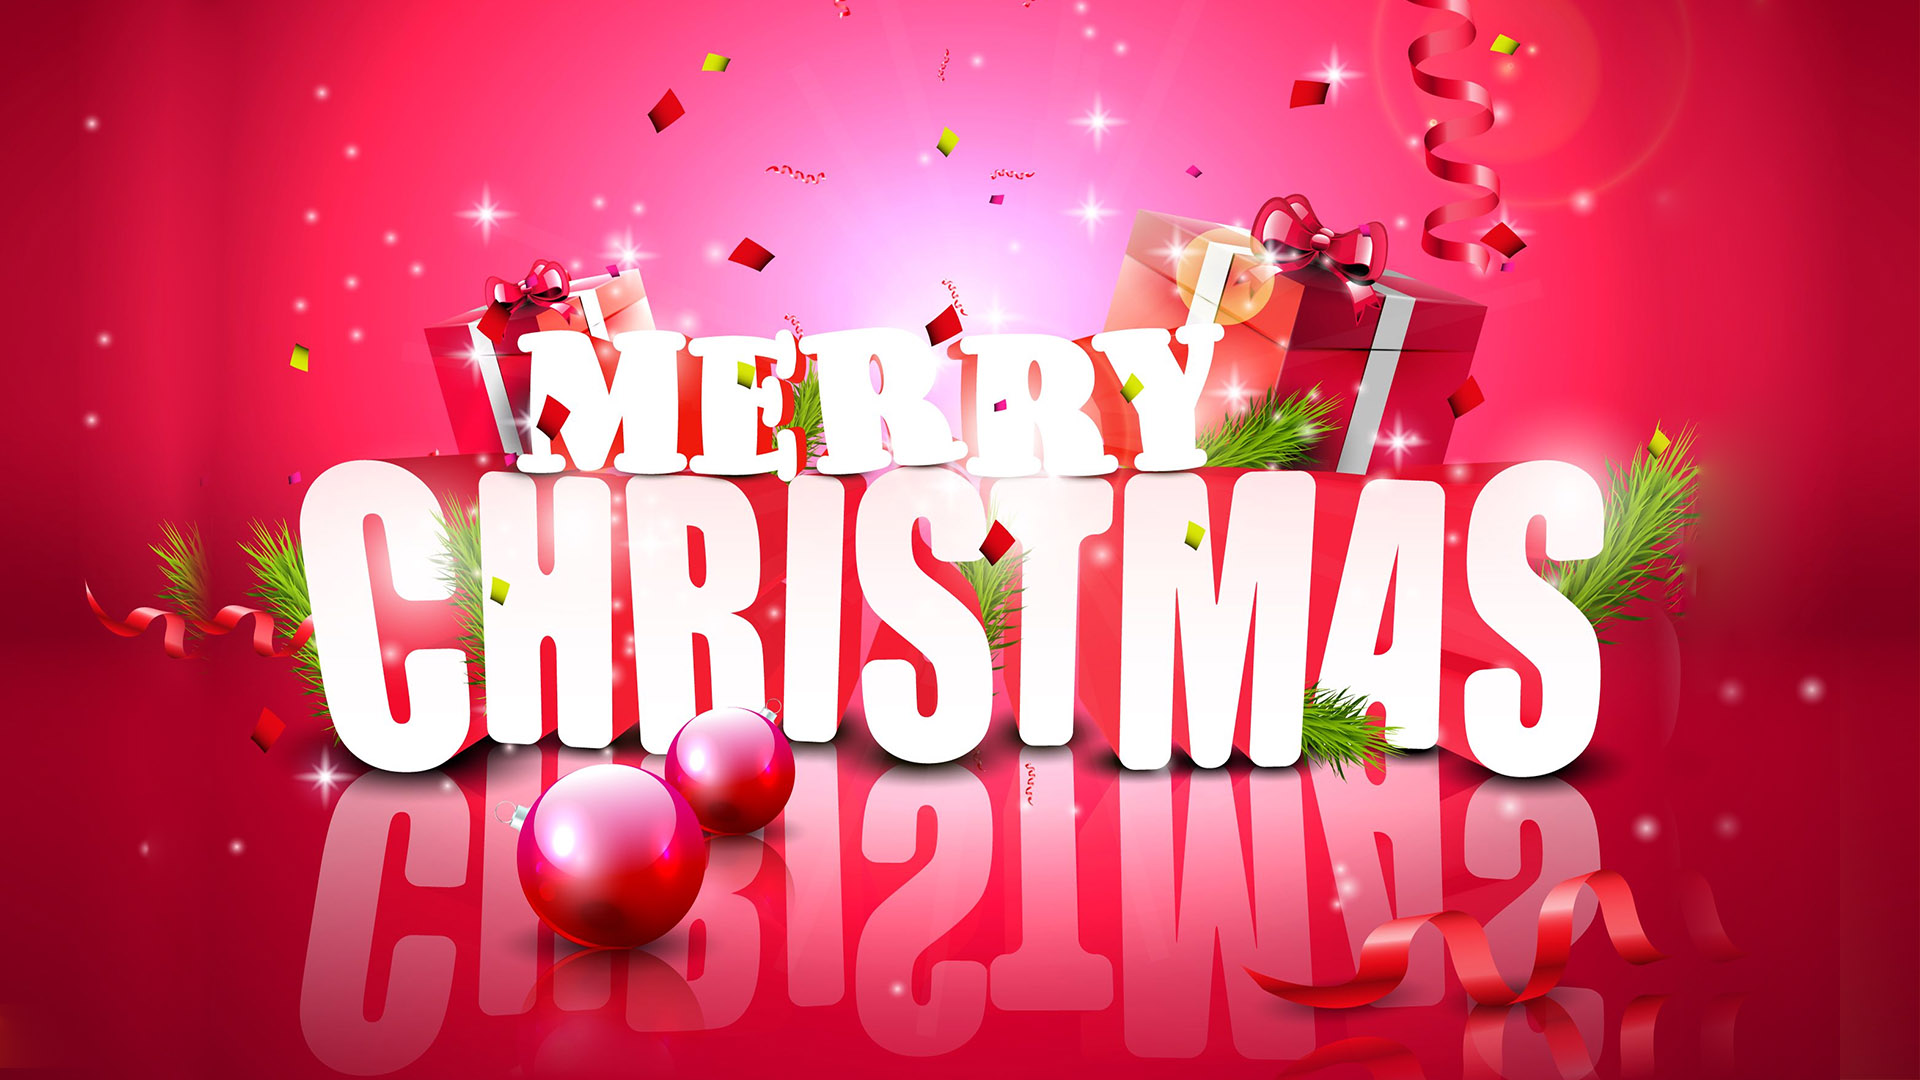 Merry Christmas Hd Wallpapers Full Size 1080p Free Download Images